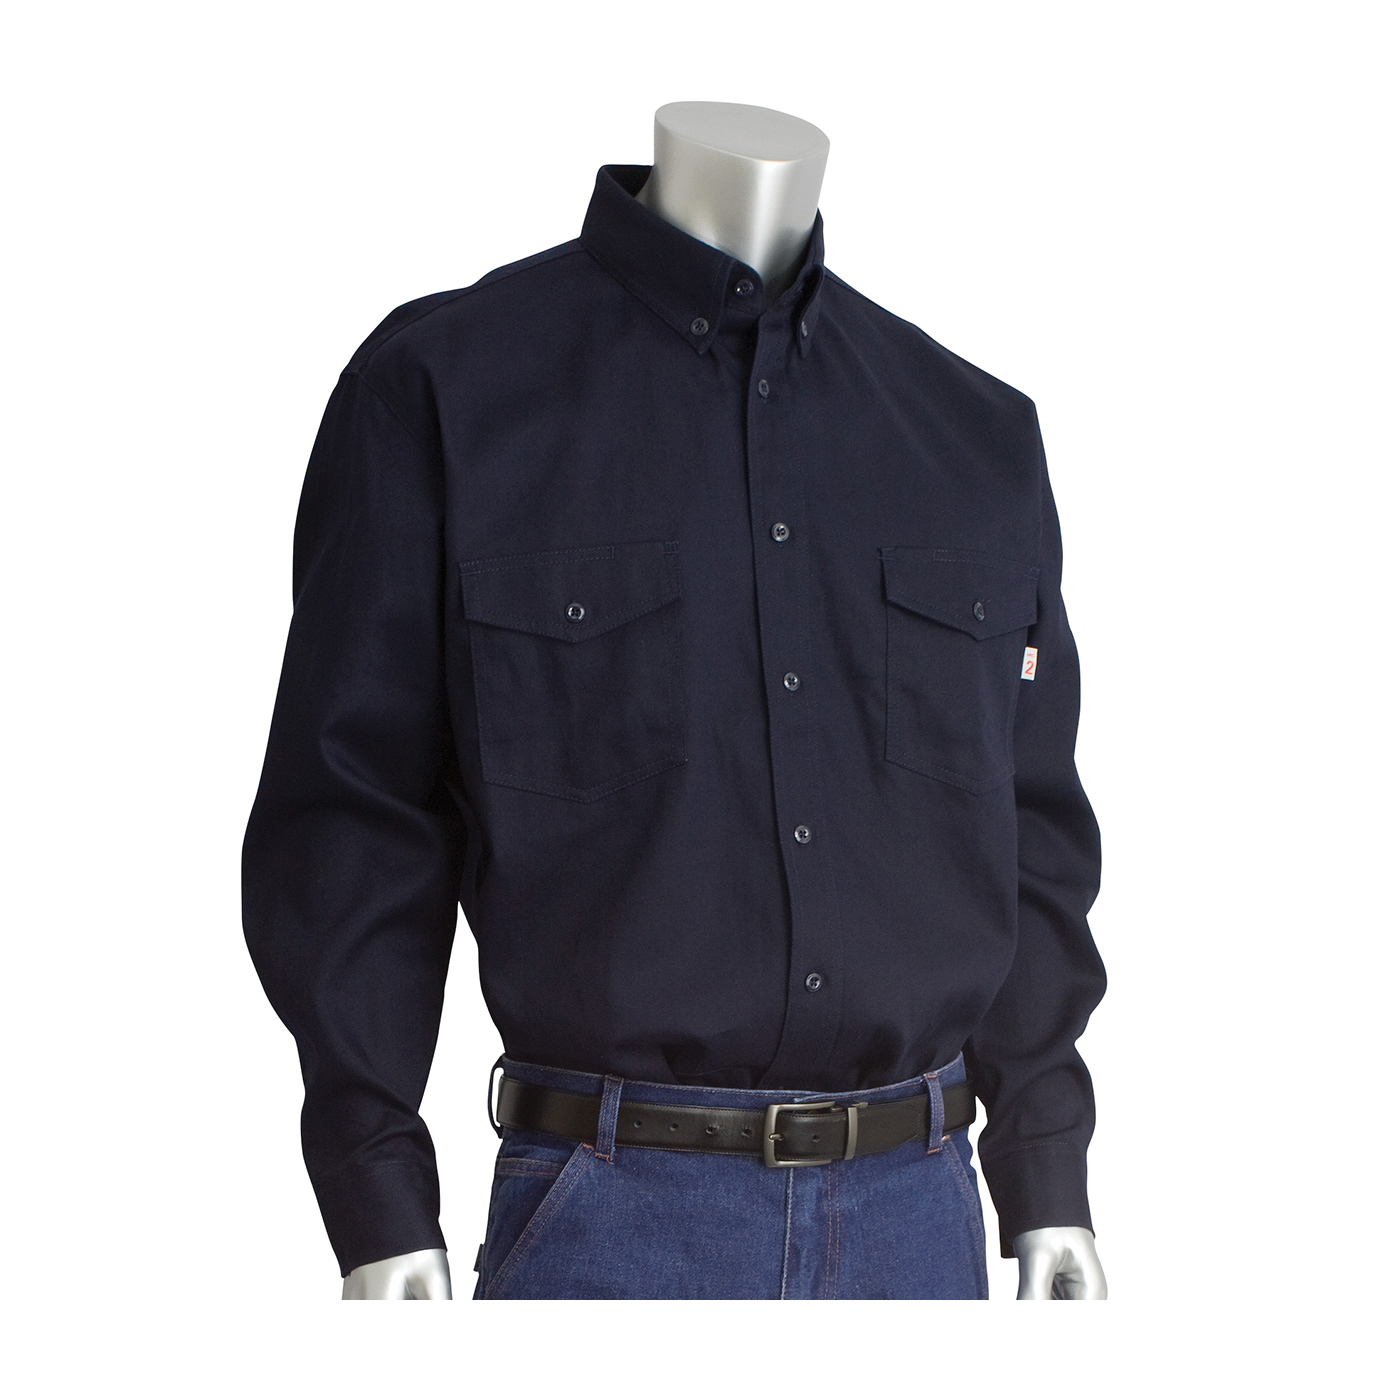 PIP® 385-FRWS-NV/L 385-FRWS Arc and Flame Resistant Long Sleeve Workshirt, L, Navy Blue, 90% Cotton/10% Nylon, 32-1/2 in L